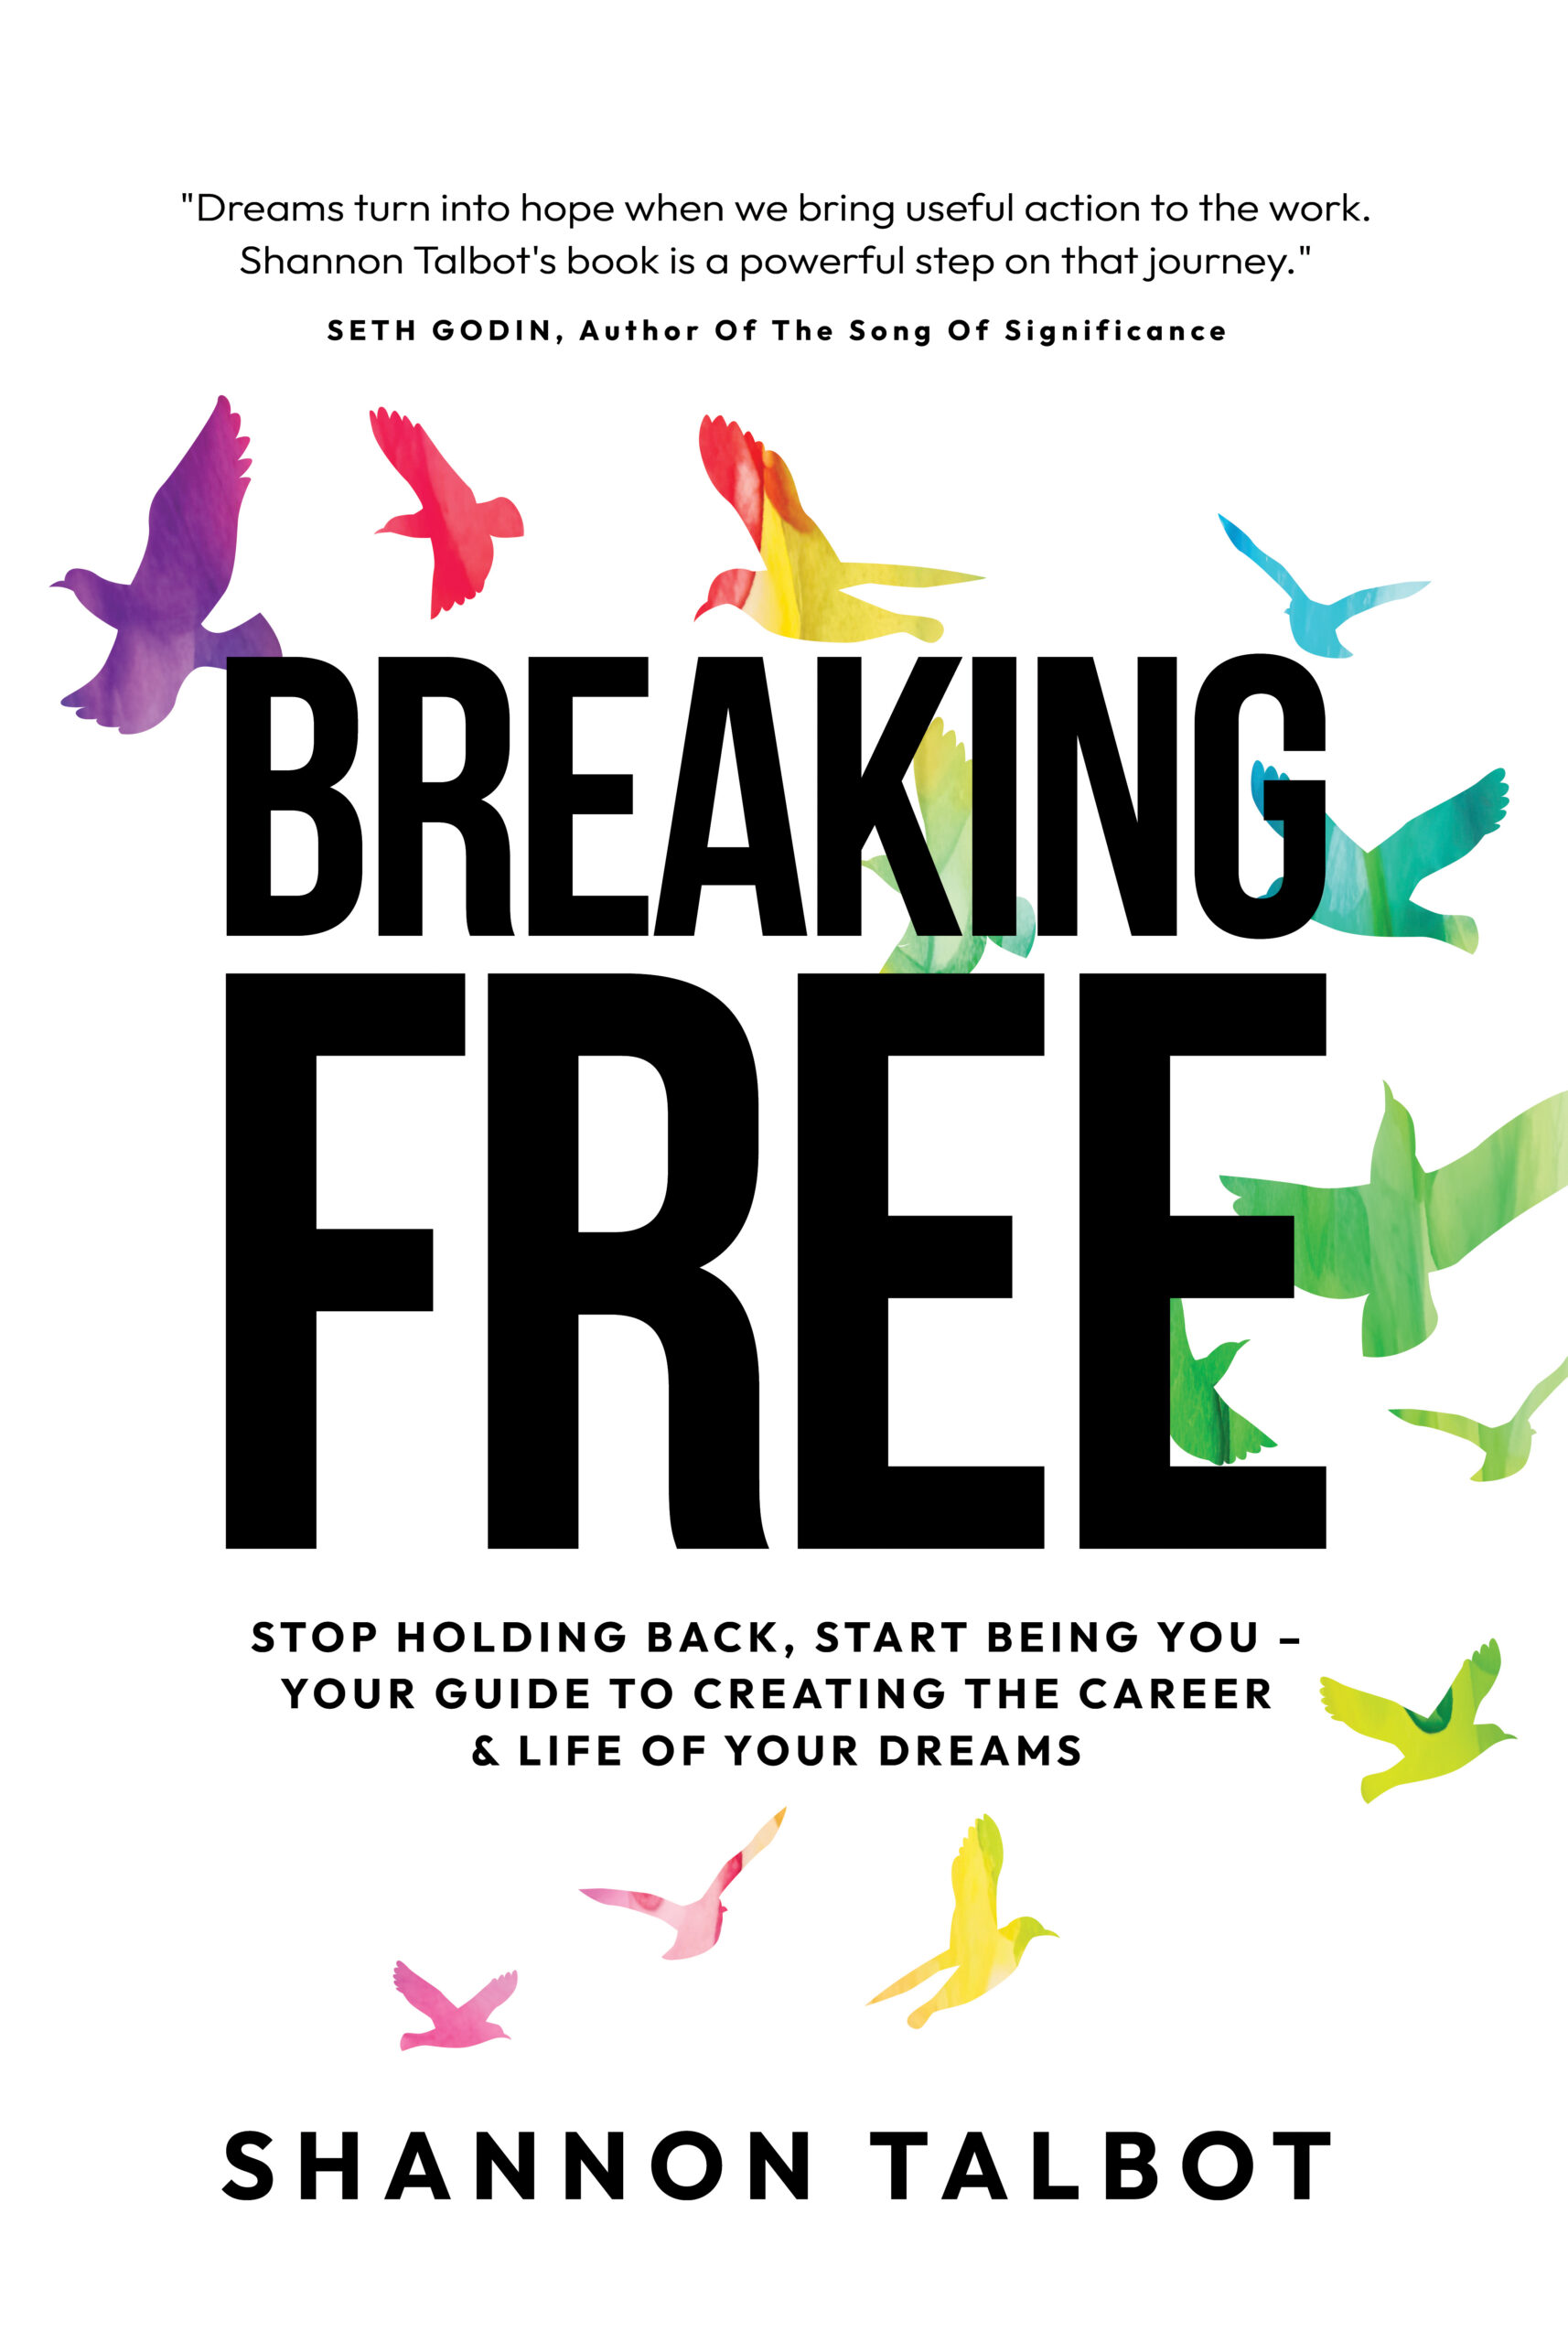 Book cover of "Breaking Free" by Shannon Talbot. Features colorful, flying birds and a quote from Seth Godin. Subtitle: "Stop Holding Back, Start Being You - Your Guide to Breaking Free and Creating the Career & Life of Your Dreams.